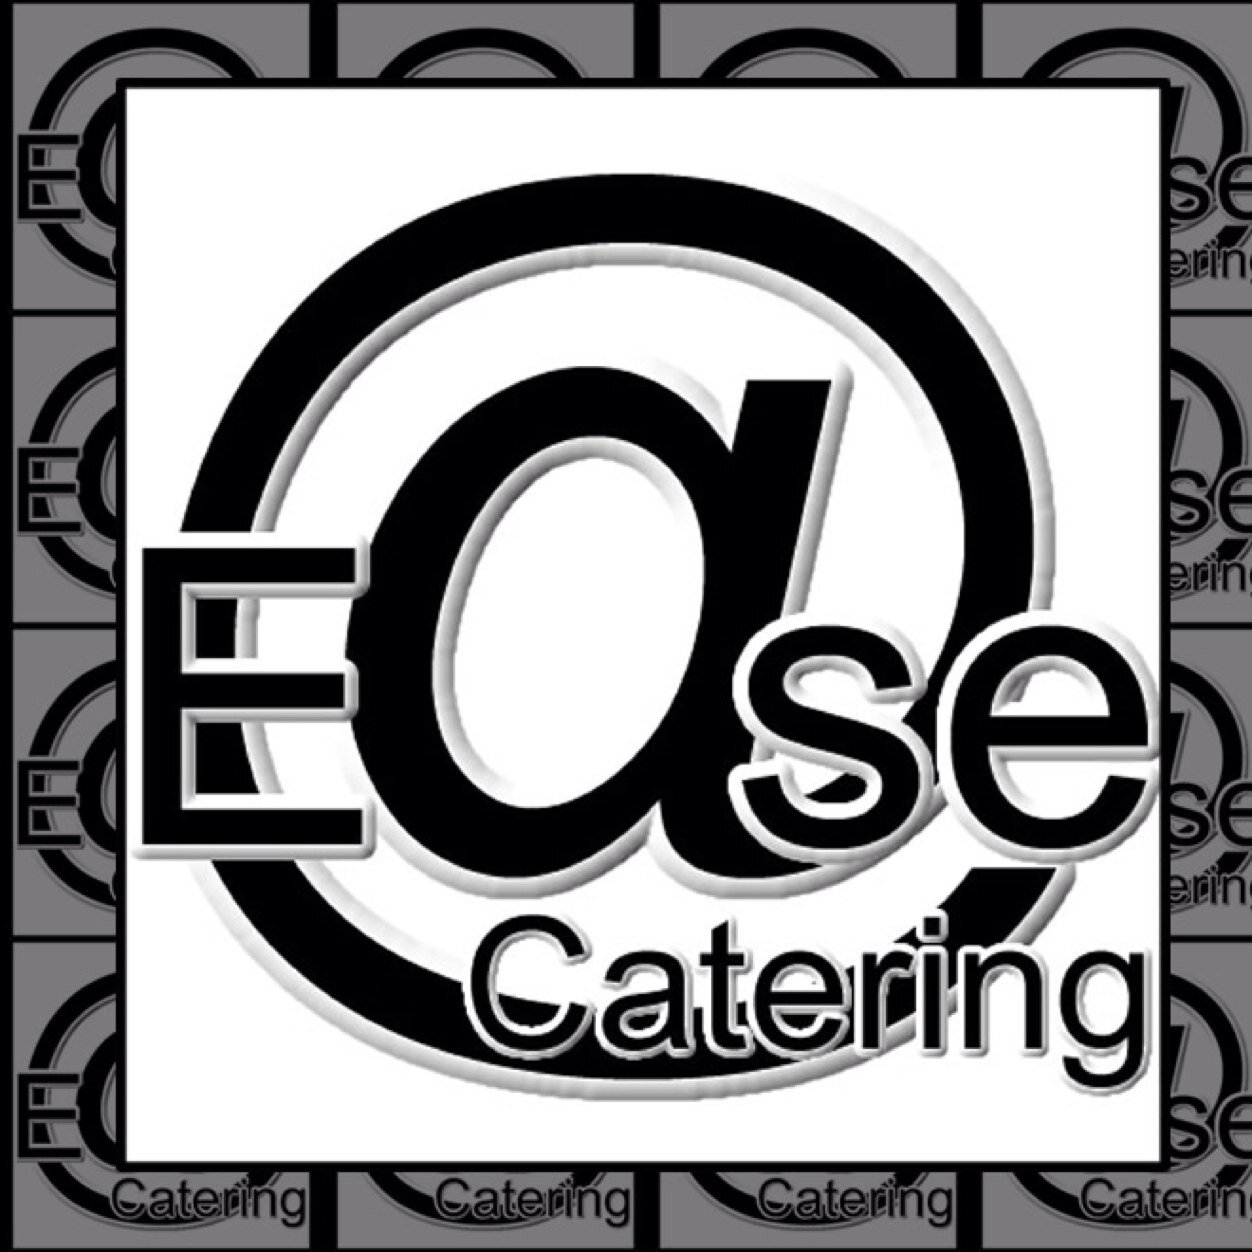 @Ease Catering Limited enquiries@ateasecatering.co.uk call us today on 07955564741